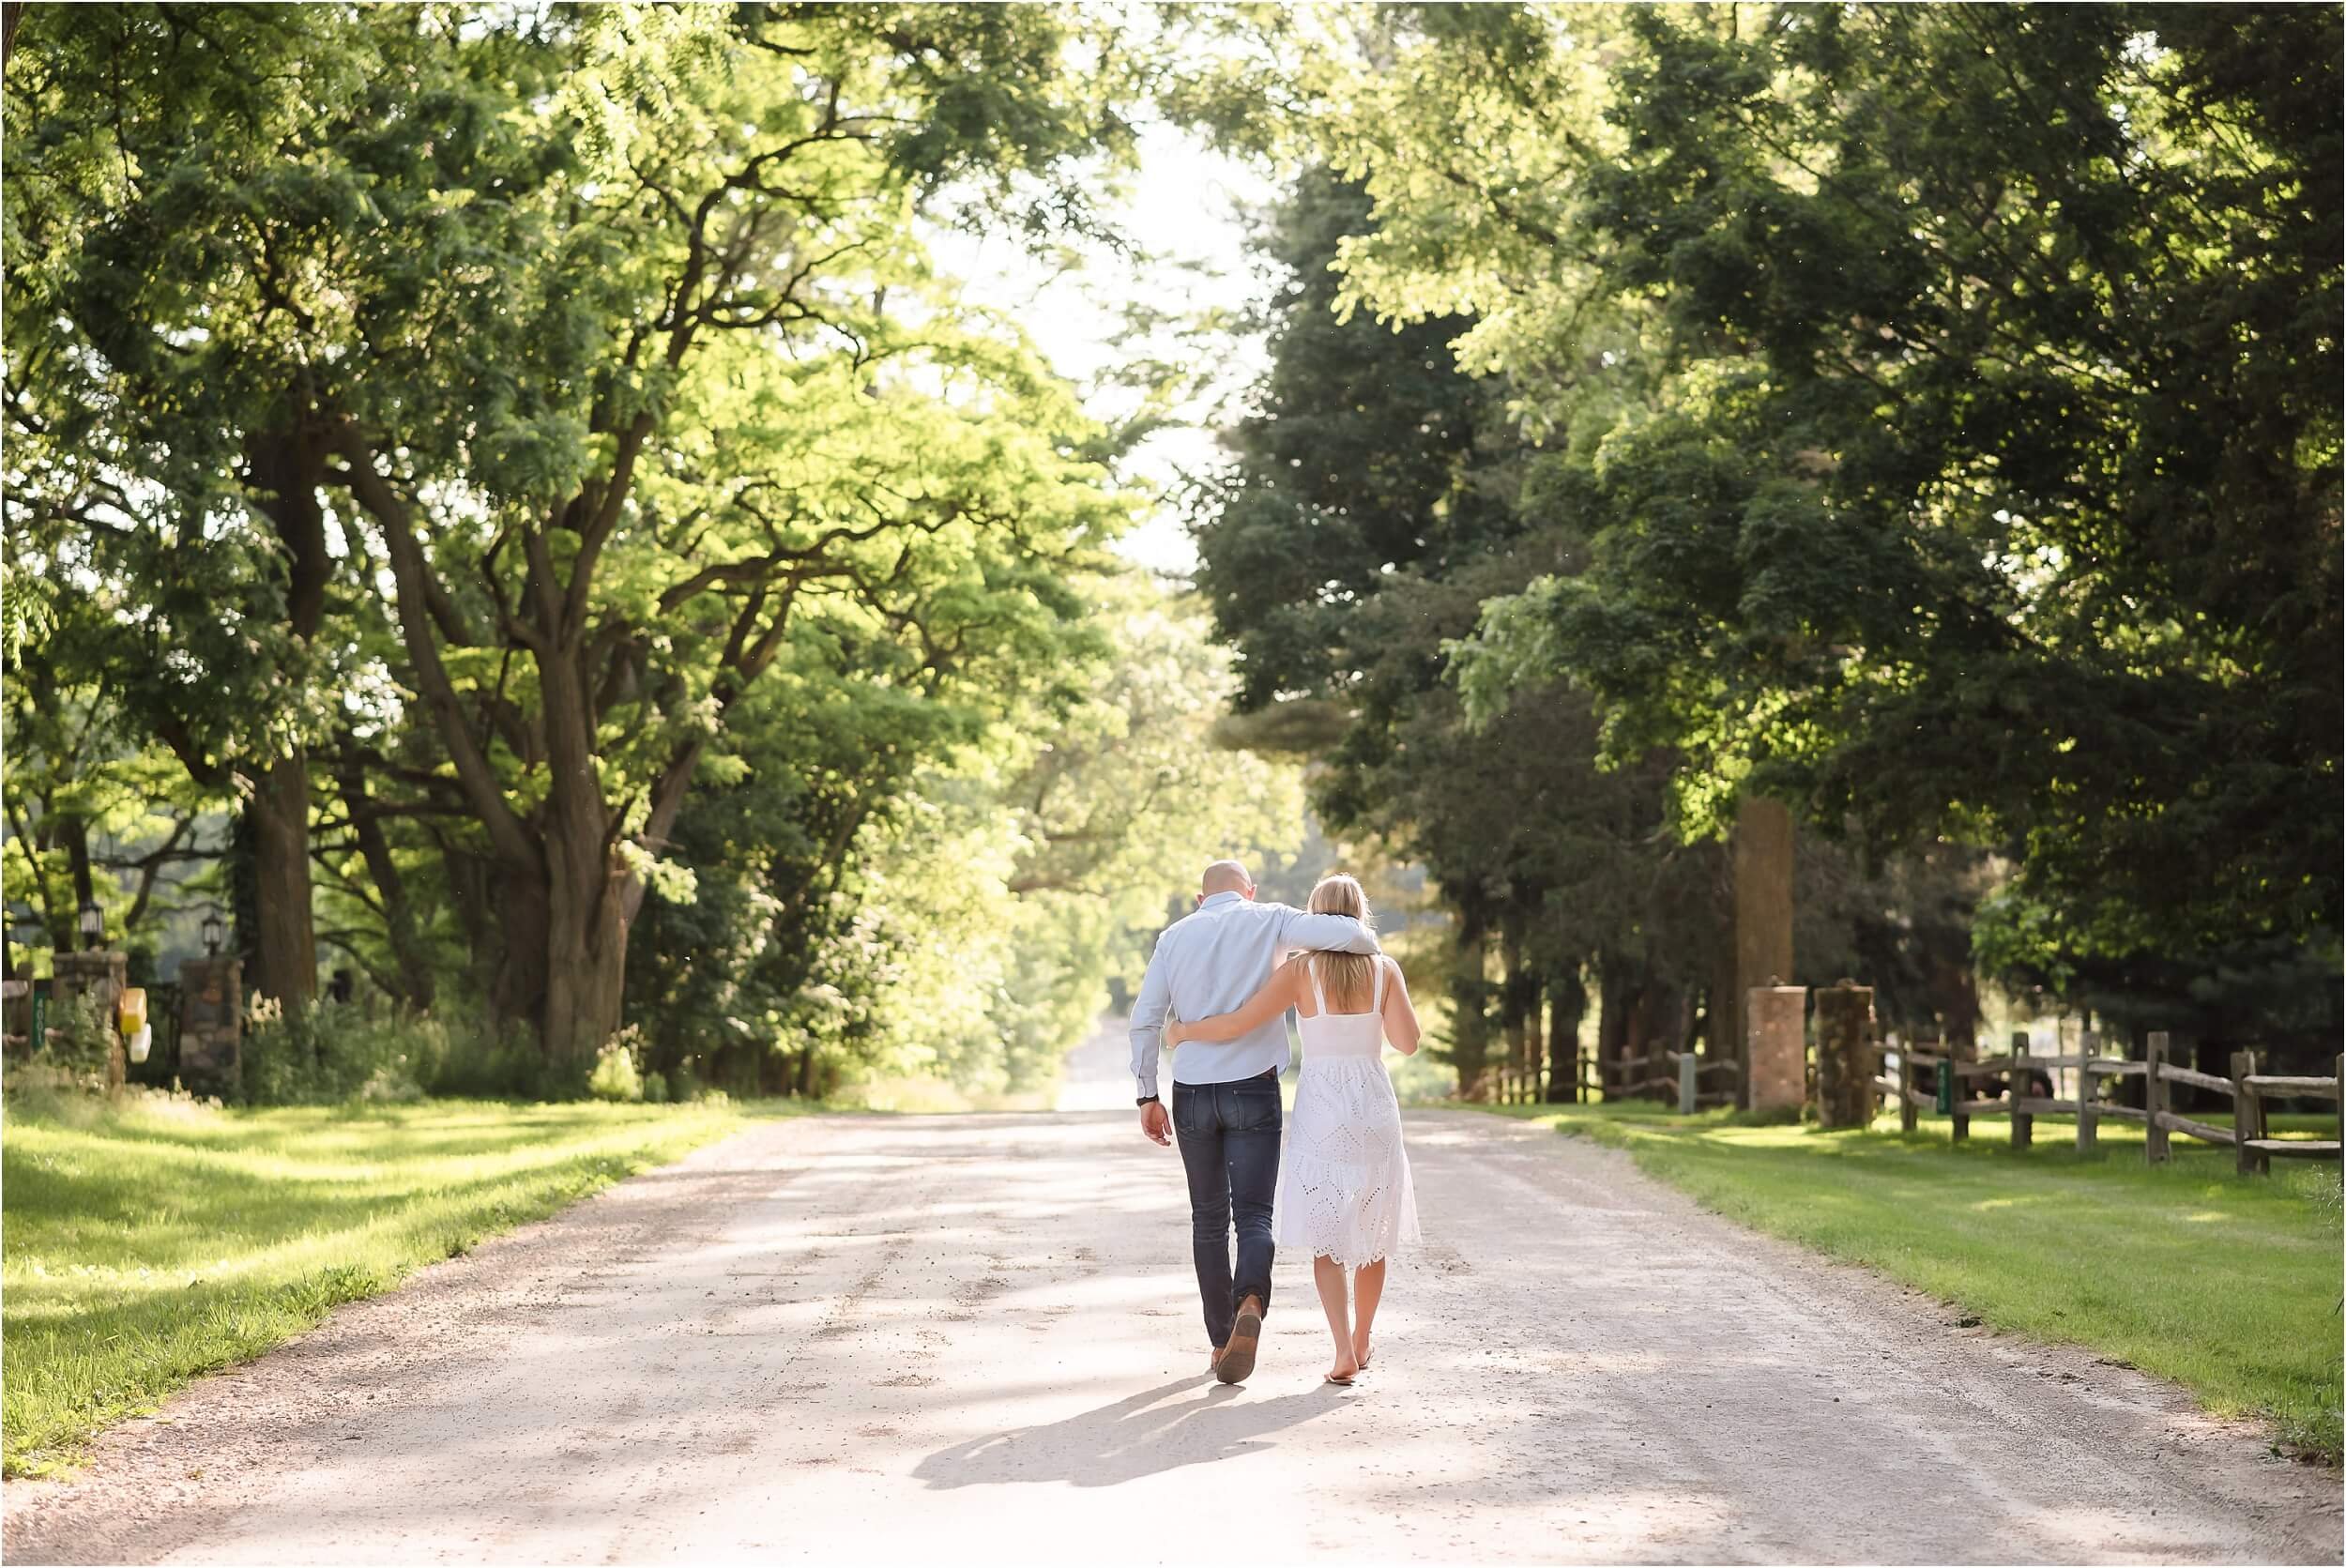  A couple walks away from the camera during their portrait session.  